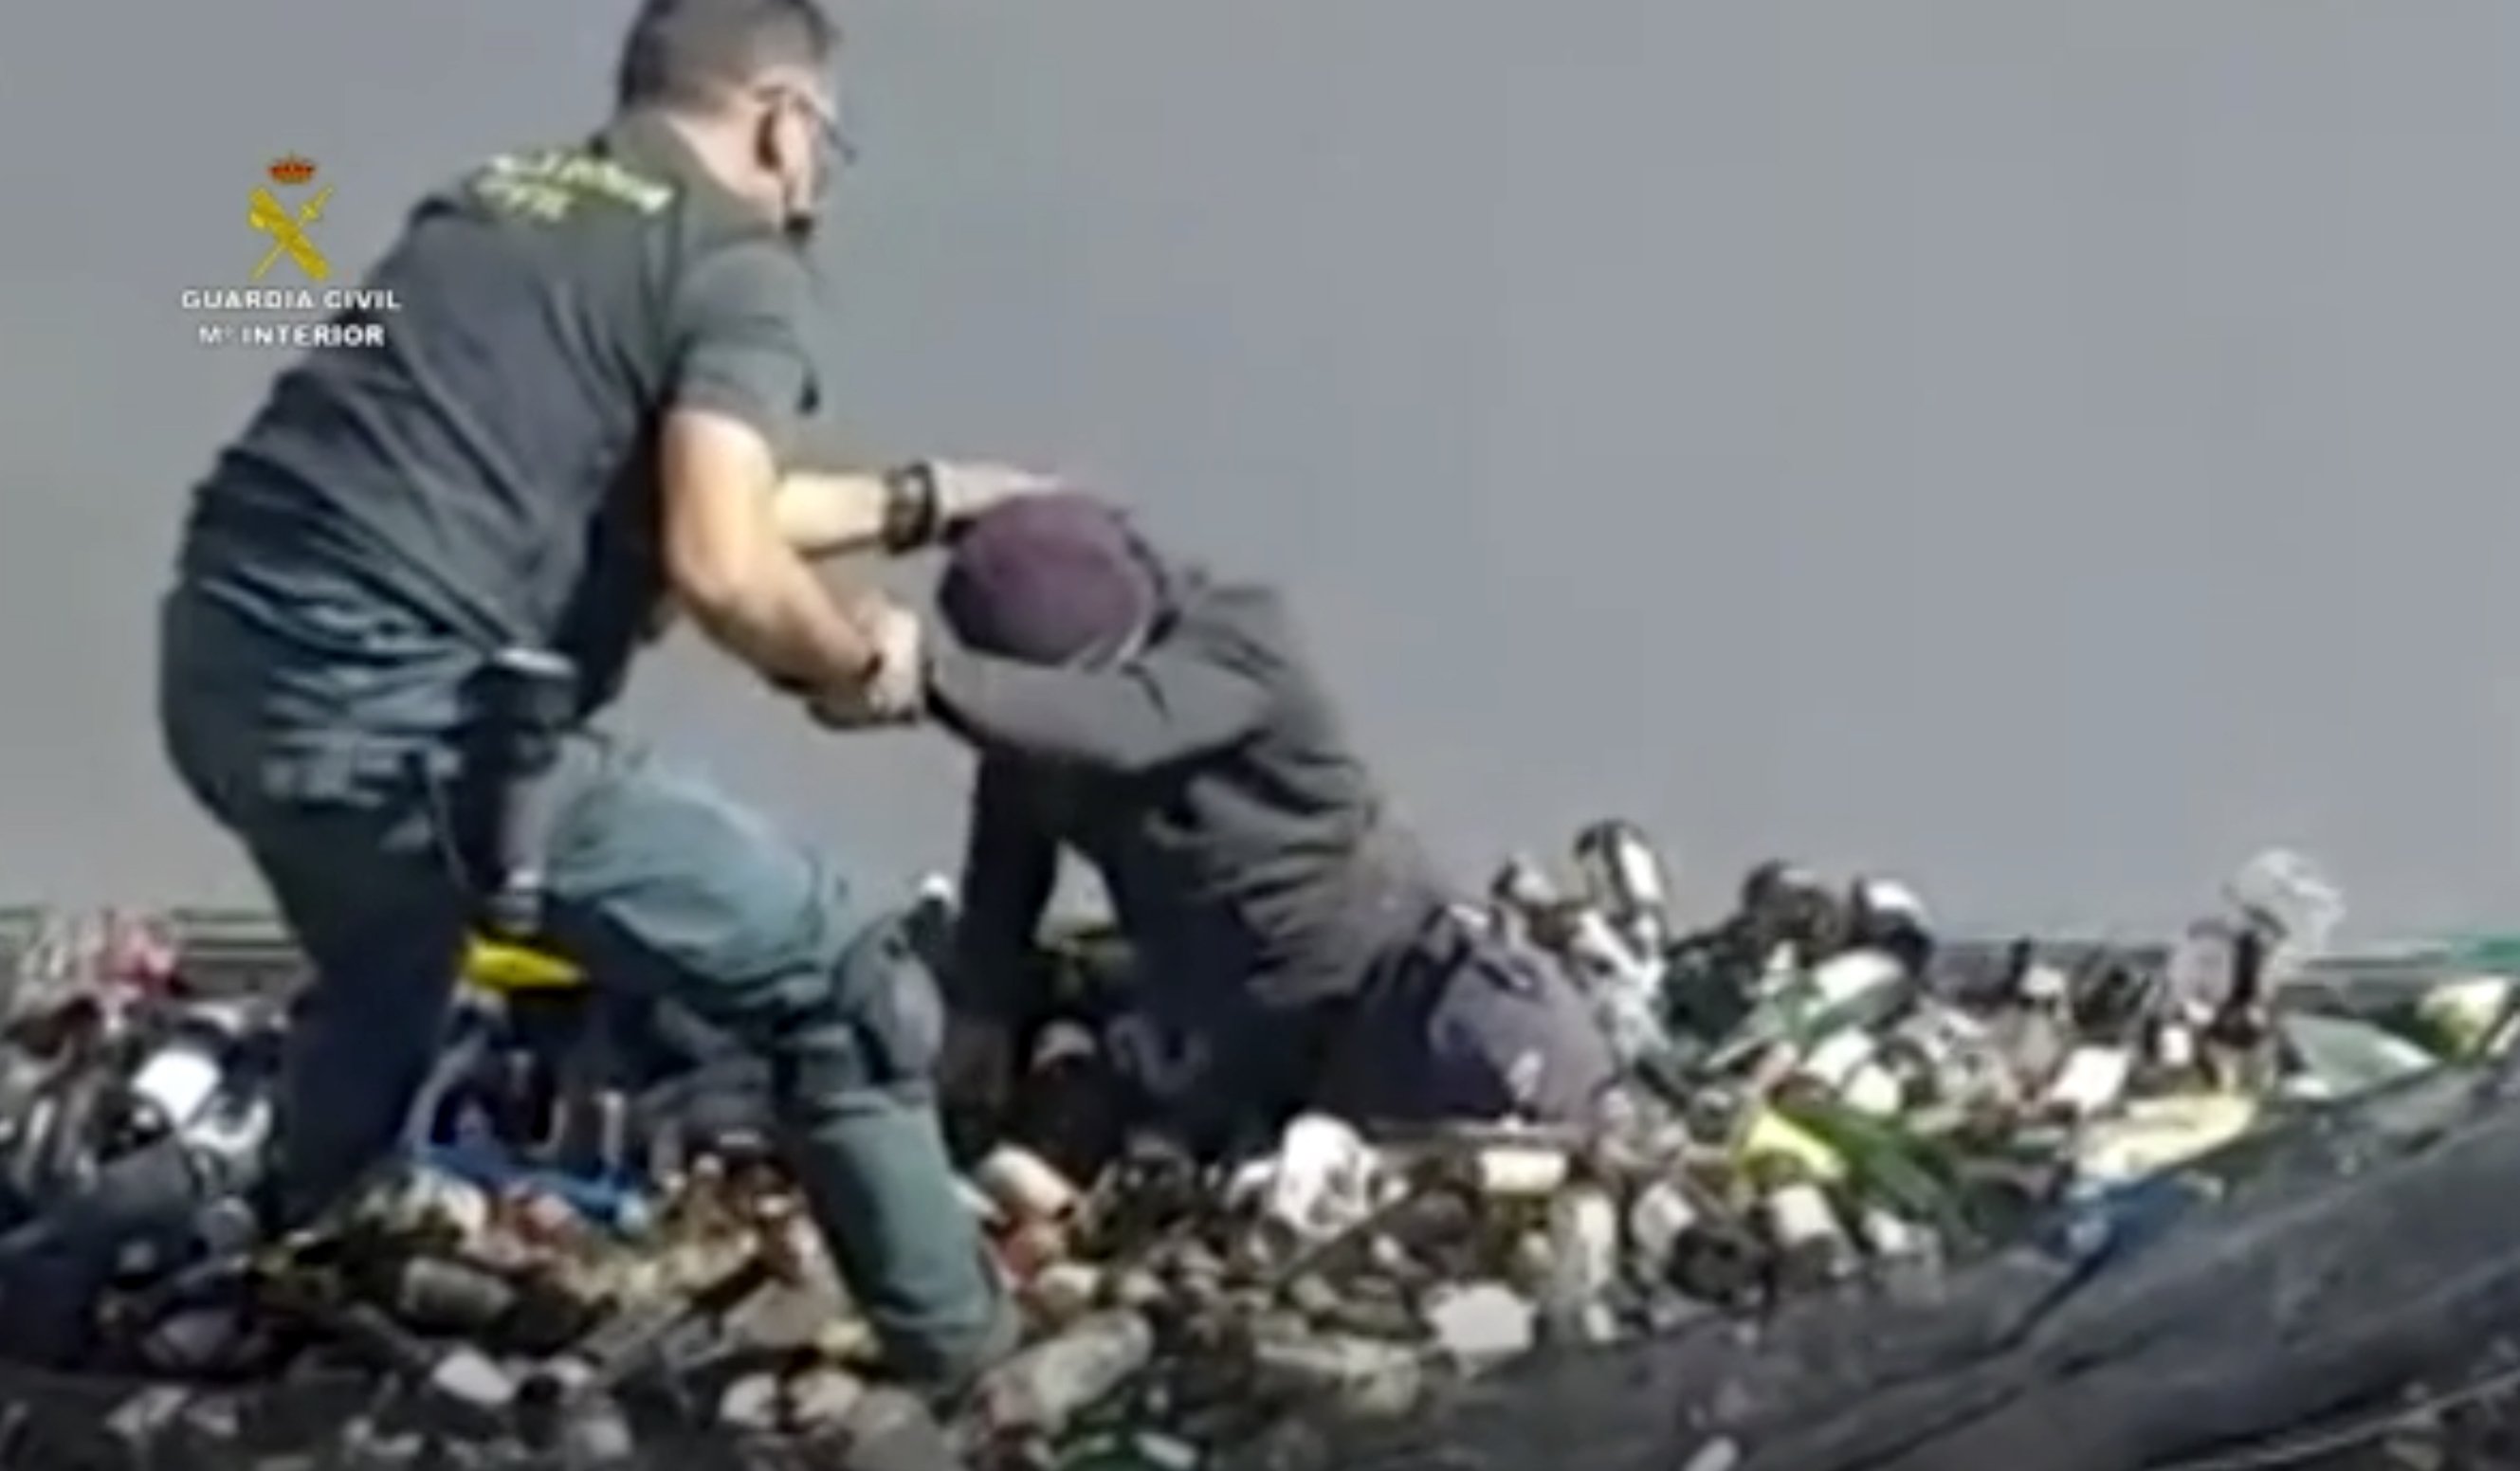 Migrants to Europe found amid broken glass and toxic ashes